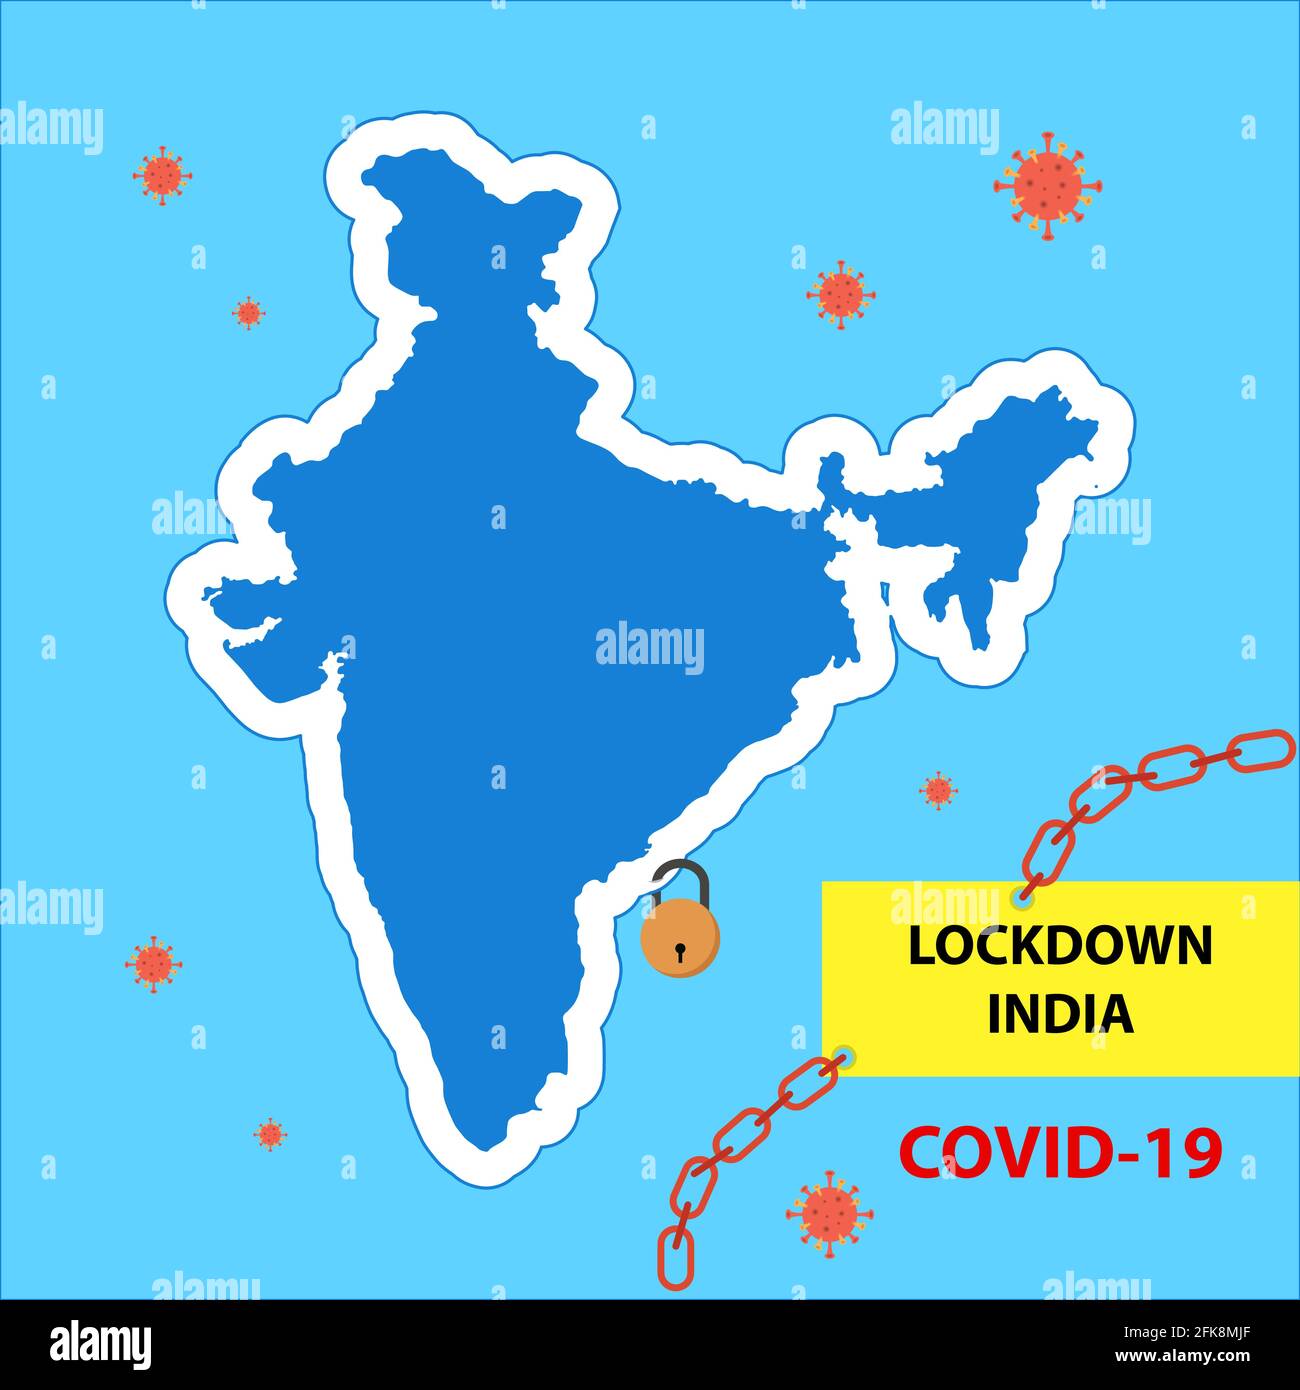 Complete Lockdown in India against Covid-19 CoronaVirus. People stay at home for 21 days to protect themselves and society. India against Novel Corona Stock Vector